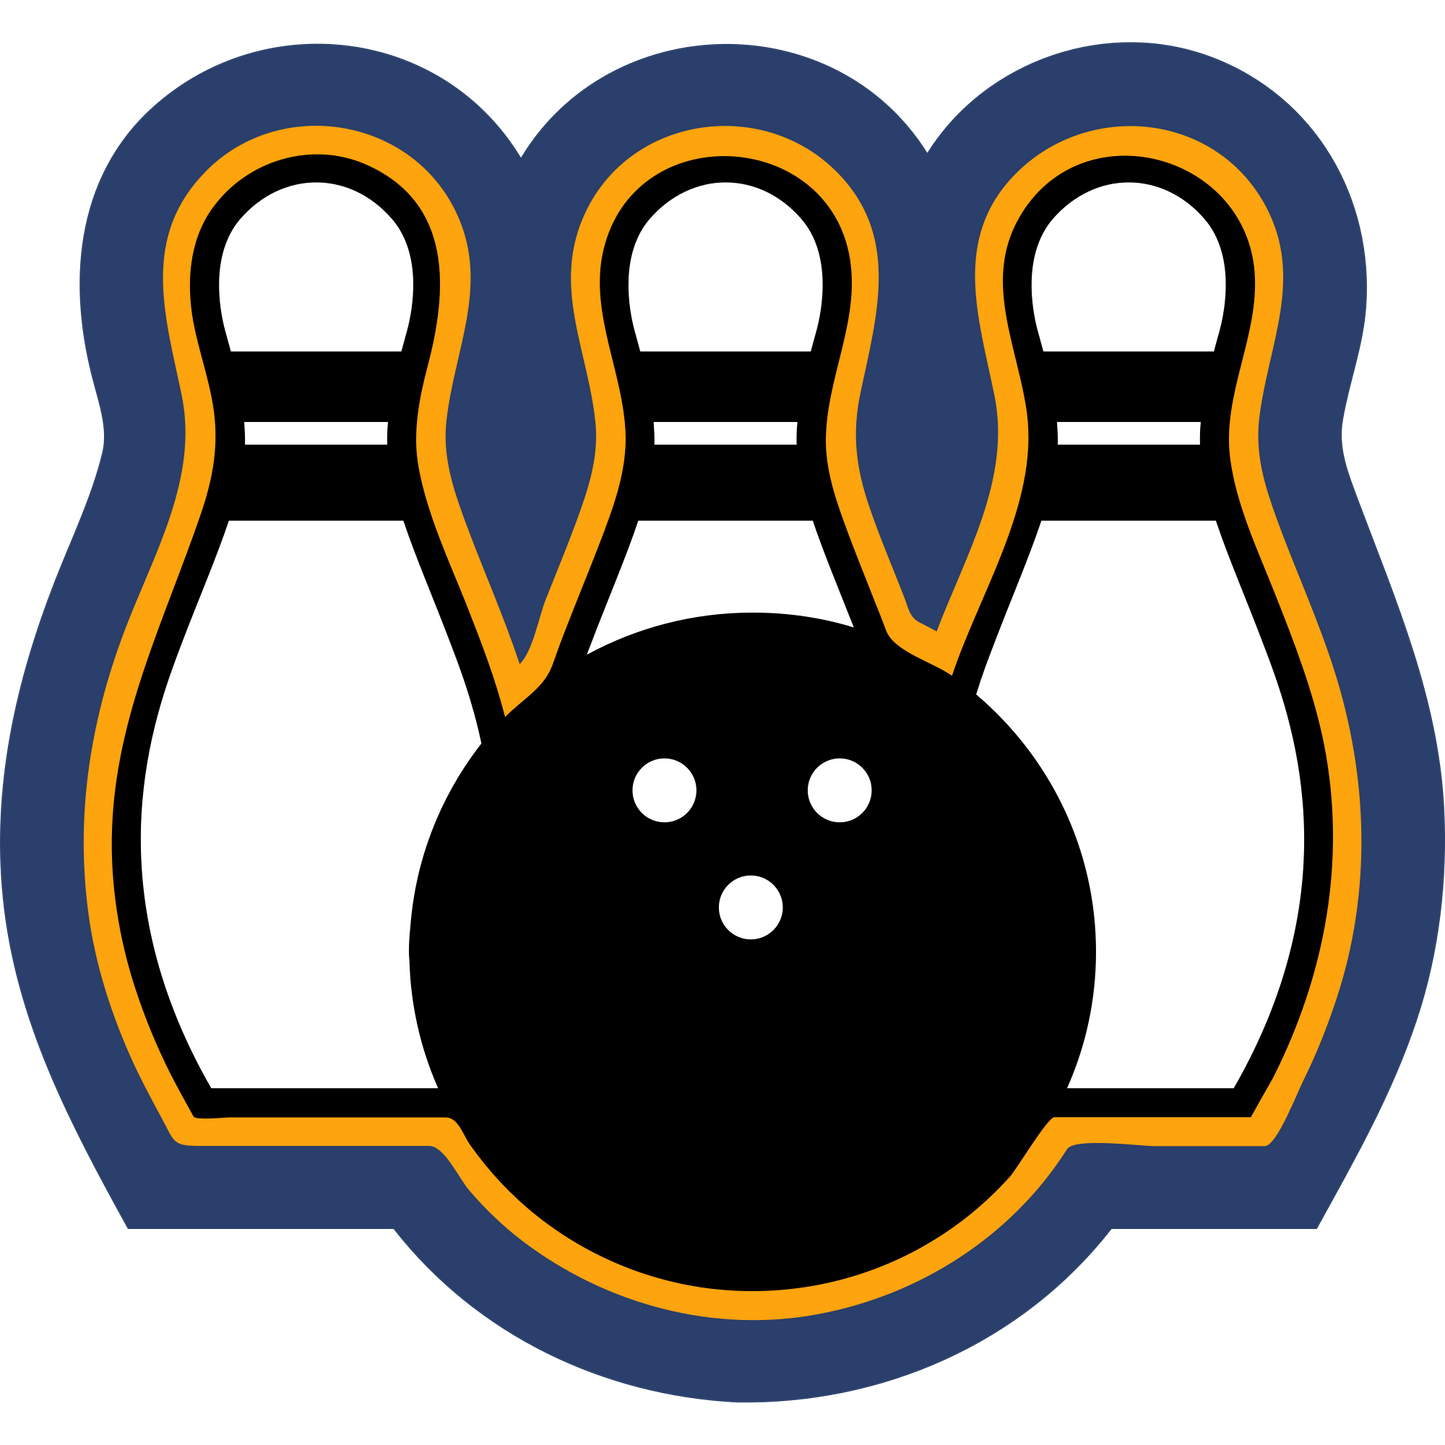 Bowling Sleeve Patch